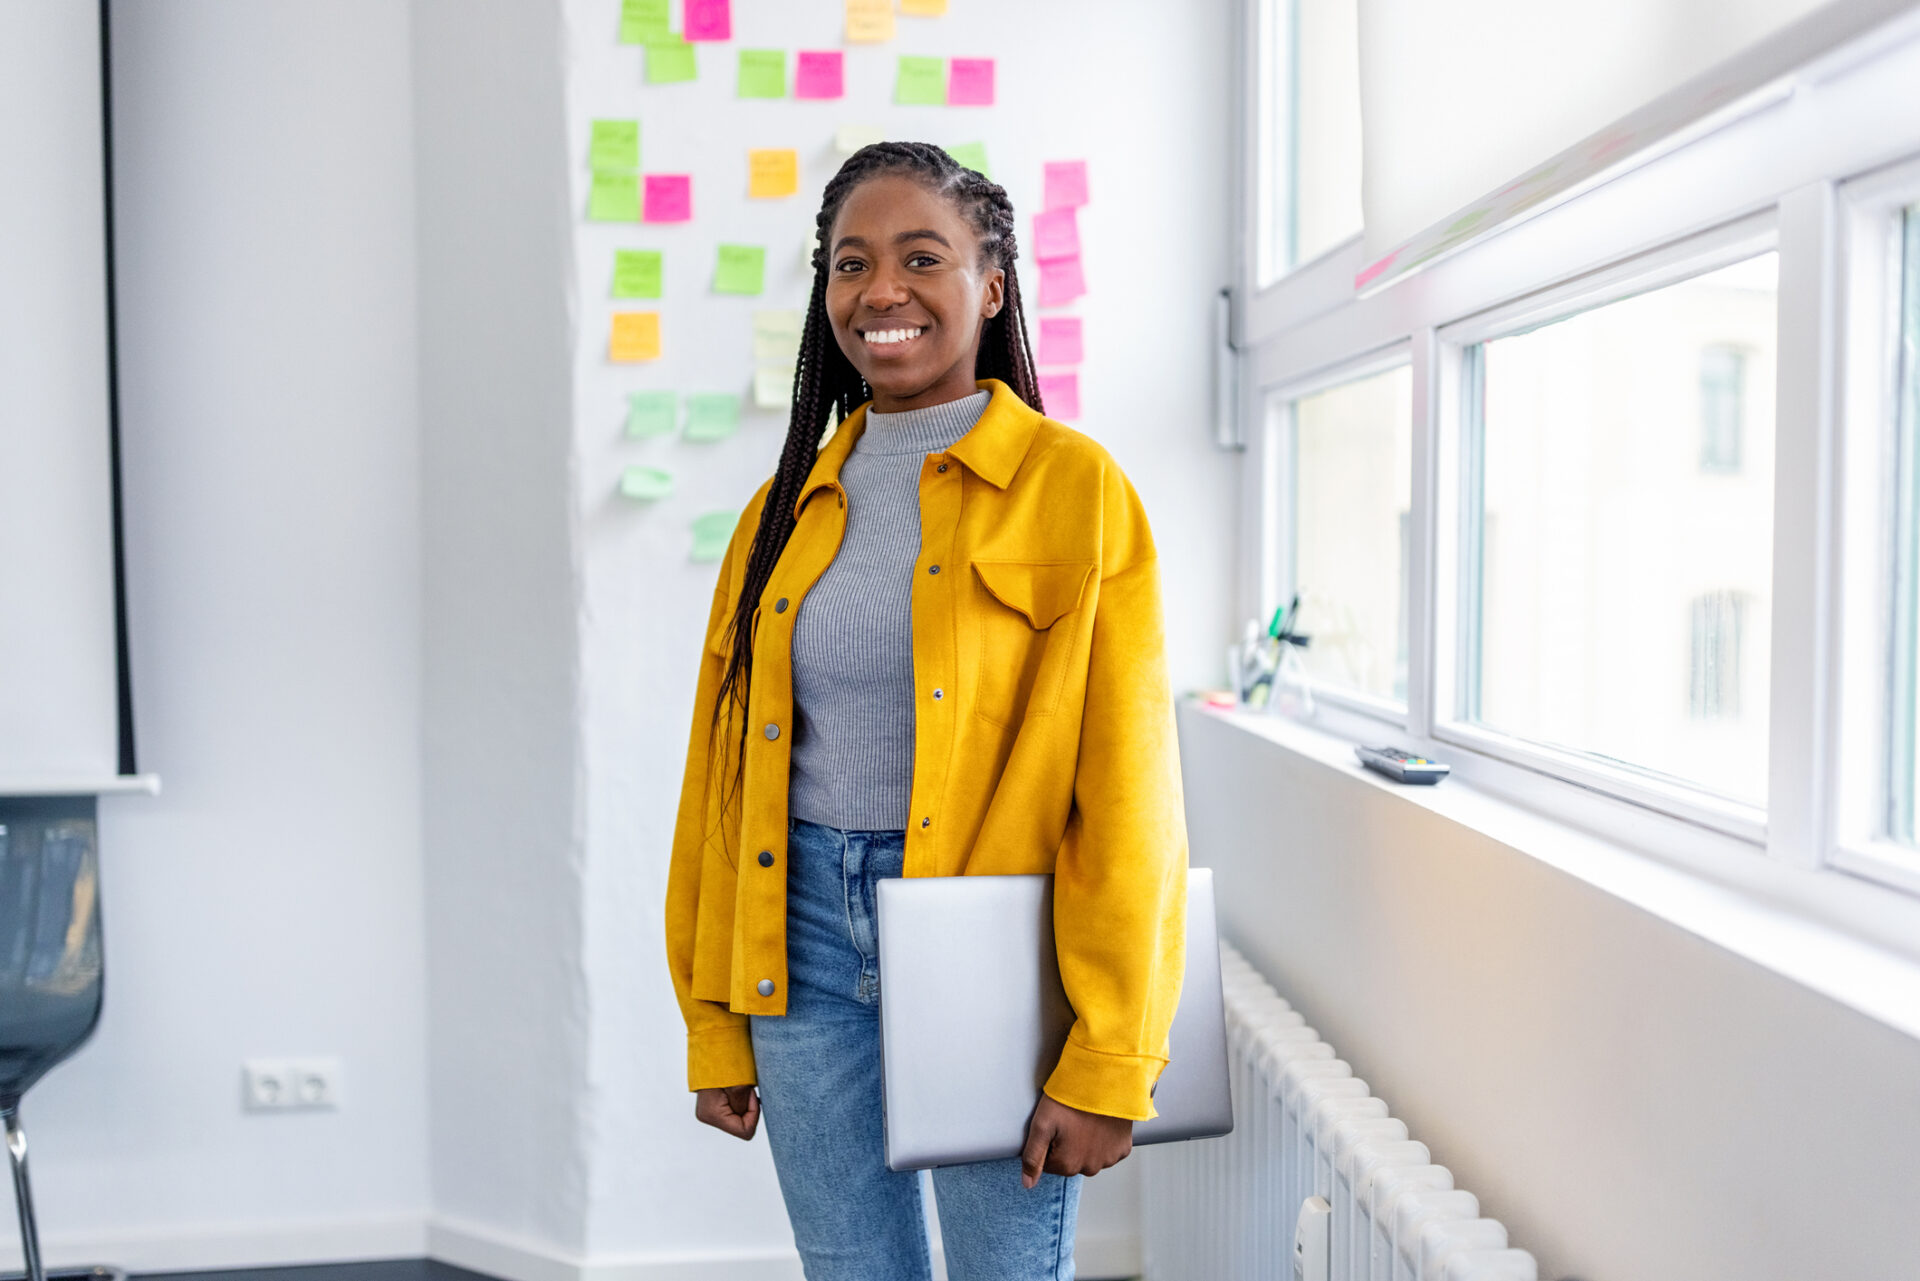 Portrait of a smiling young woman working at startup company